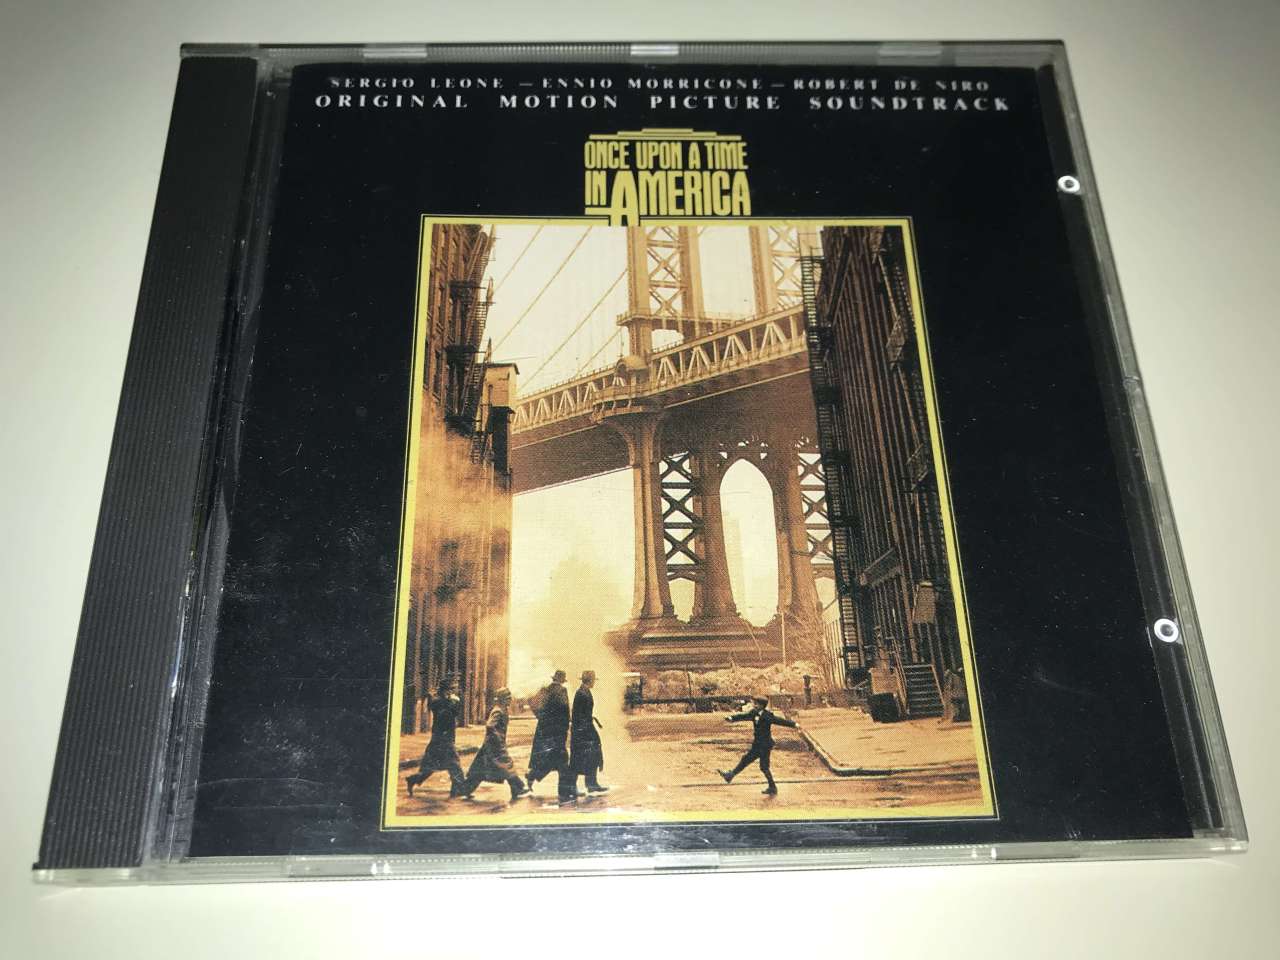 Ennio Morricone – Once Upon A Time In America (Original Motion Picture Soundtrack)